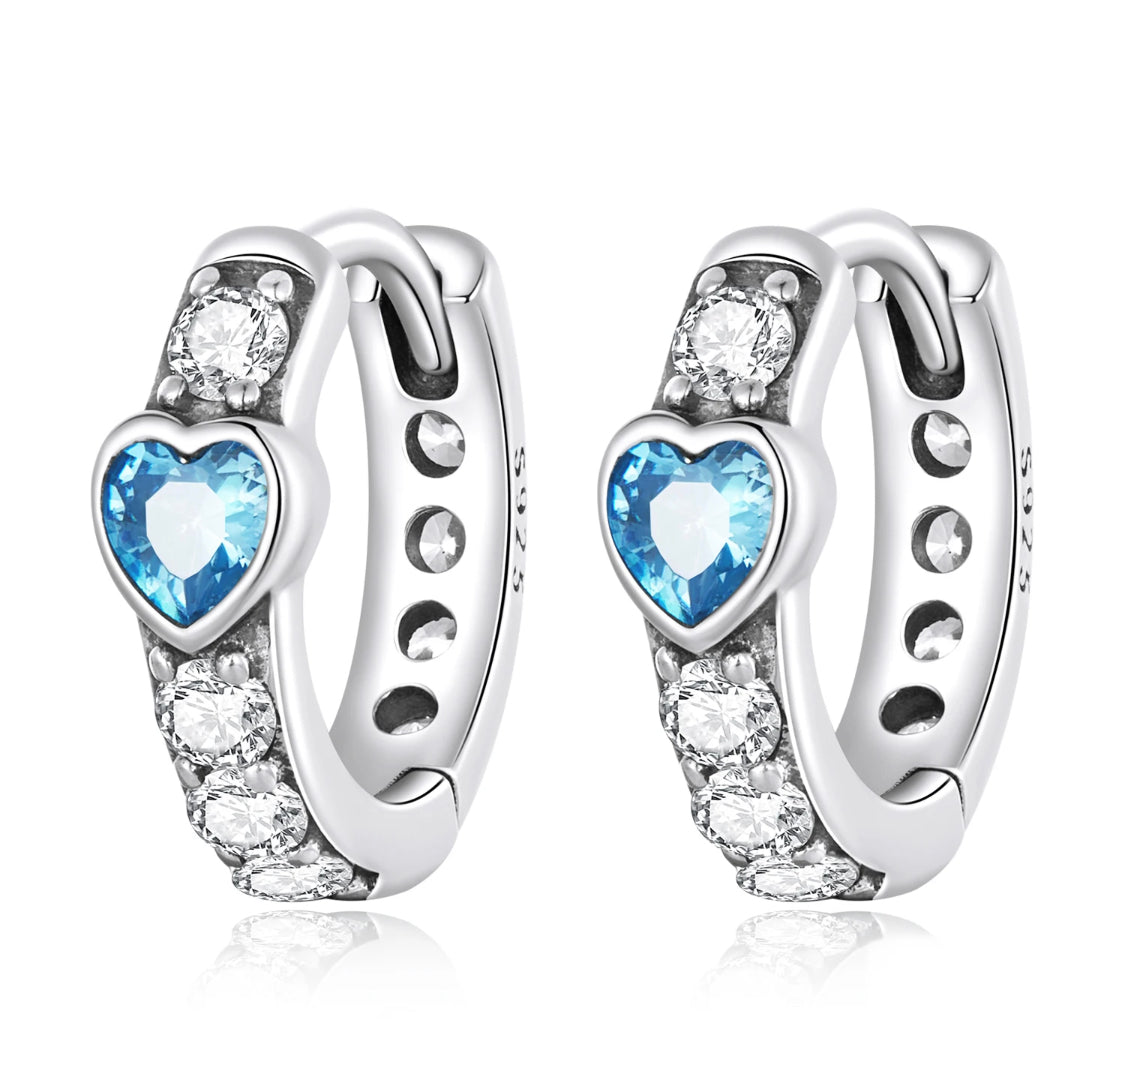 925 Sterling Silver Platinum Plated Heart & Round CZ Stones for Toddler Kids & Teens